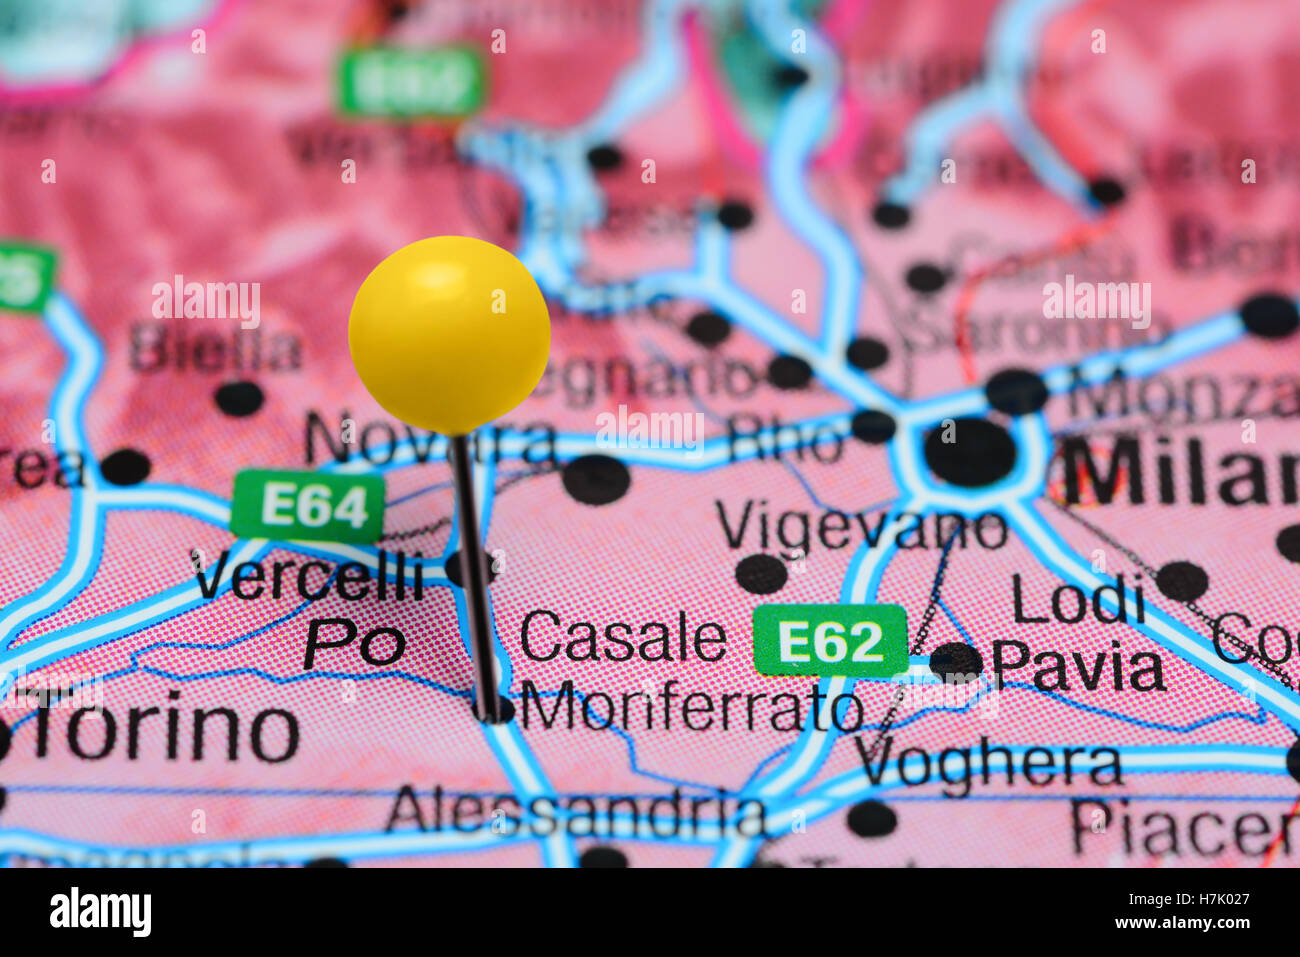 Casale Monferrato pinned on a map of Italy Stock Photo